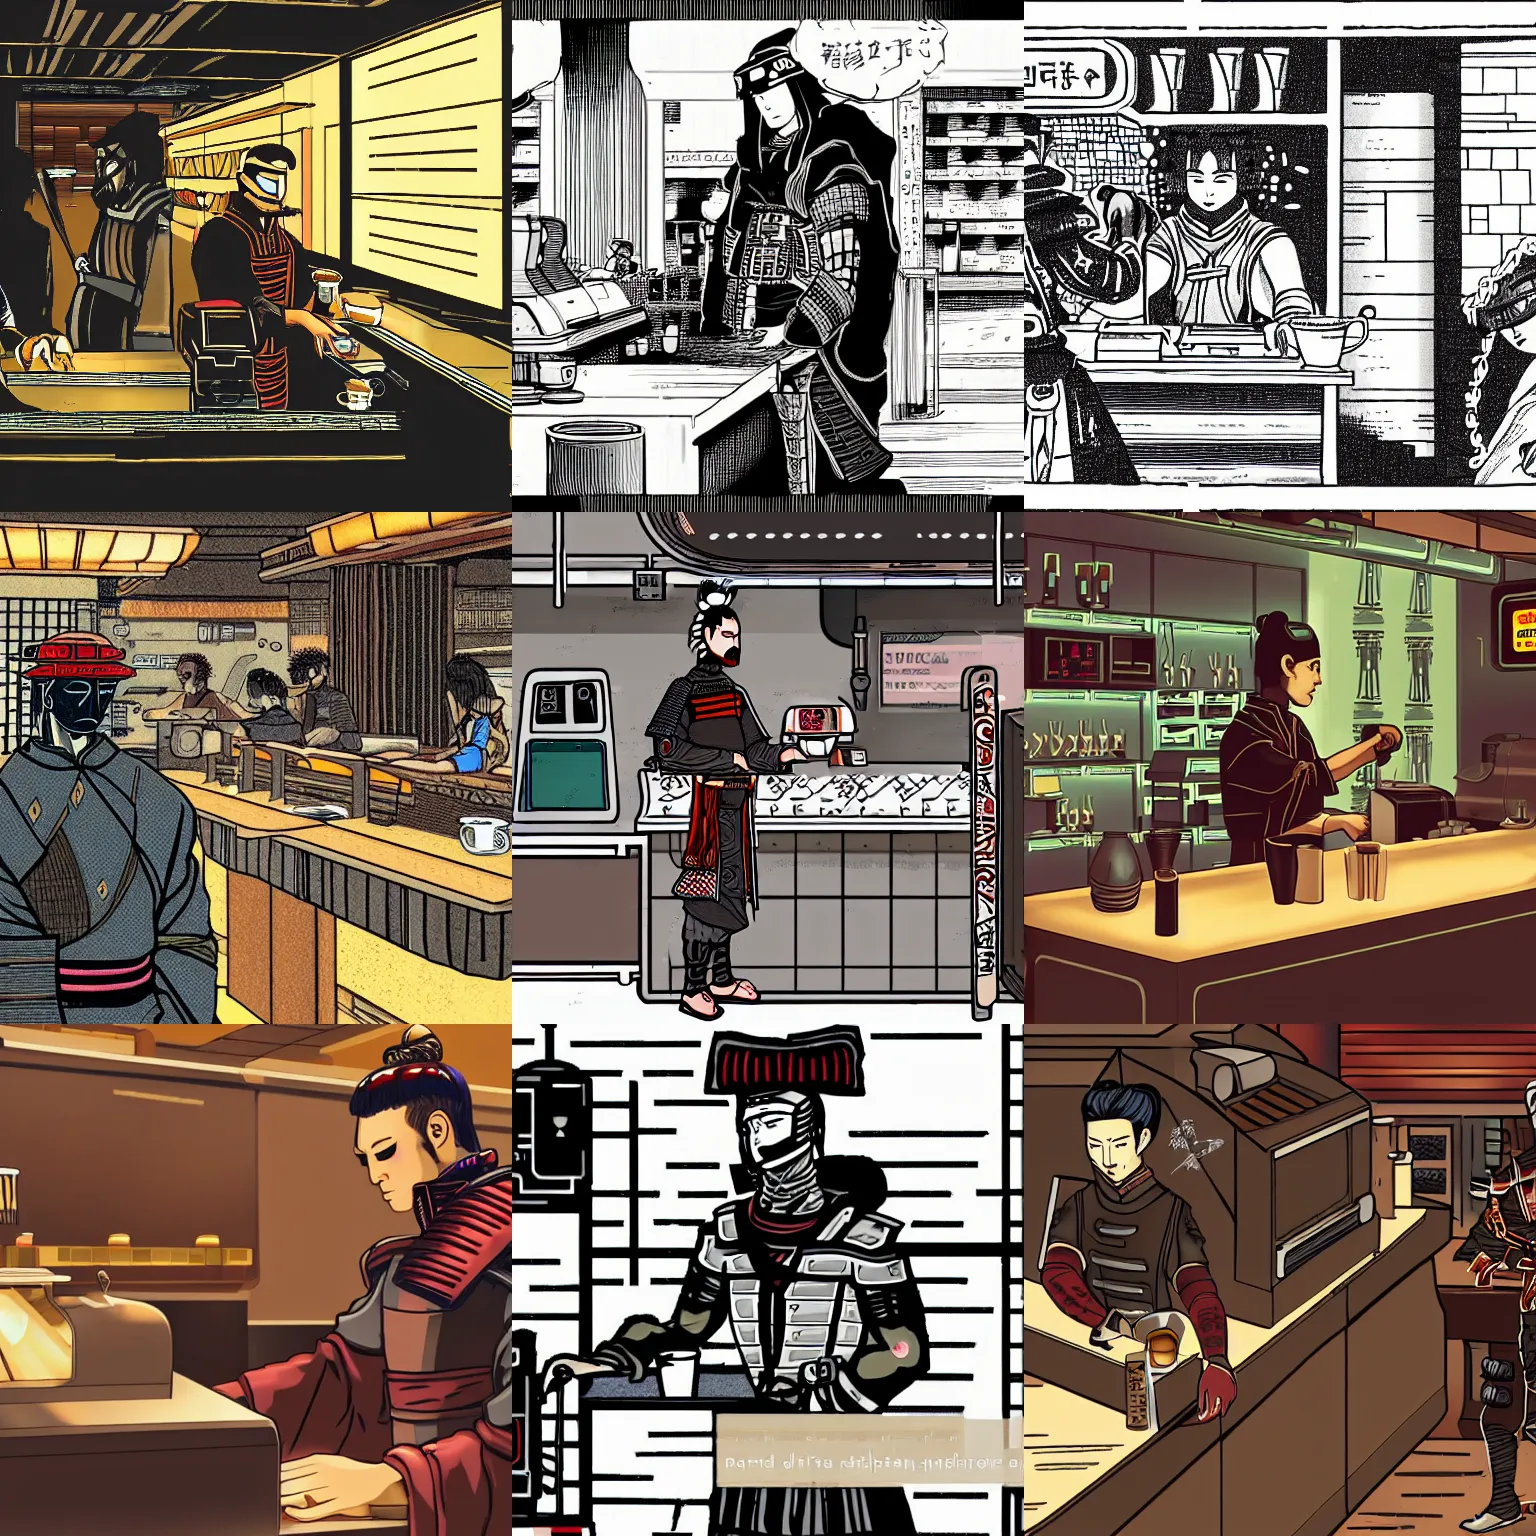 Prompt: A cyberpunk samurai orders coffee from the barista at the Roman-style bar counter